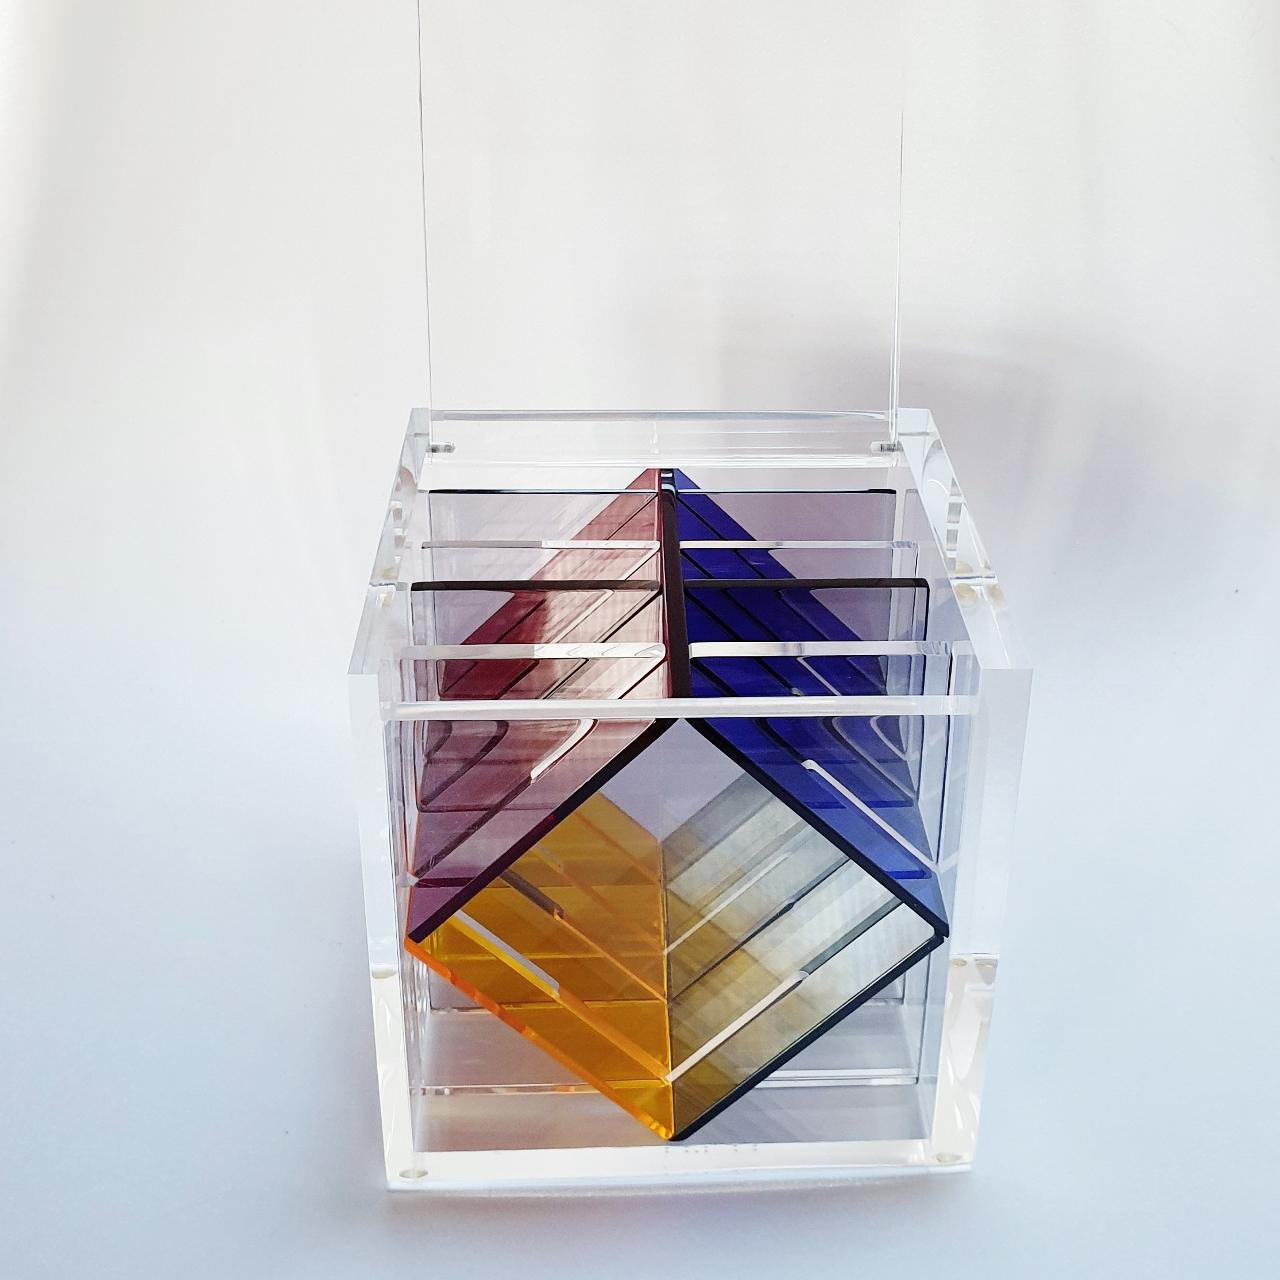 Homage to Van Doesburg is a unique small size contemporary modern cube sculpture by the famous Dutch artist couple Nel Haringa and Fred Olijve. The cube sculpture consists of only eight hand cut hand polished plexiglass elements carefully stacked